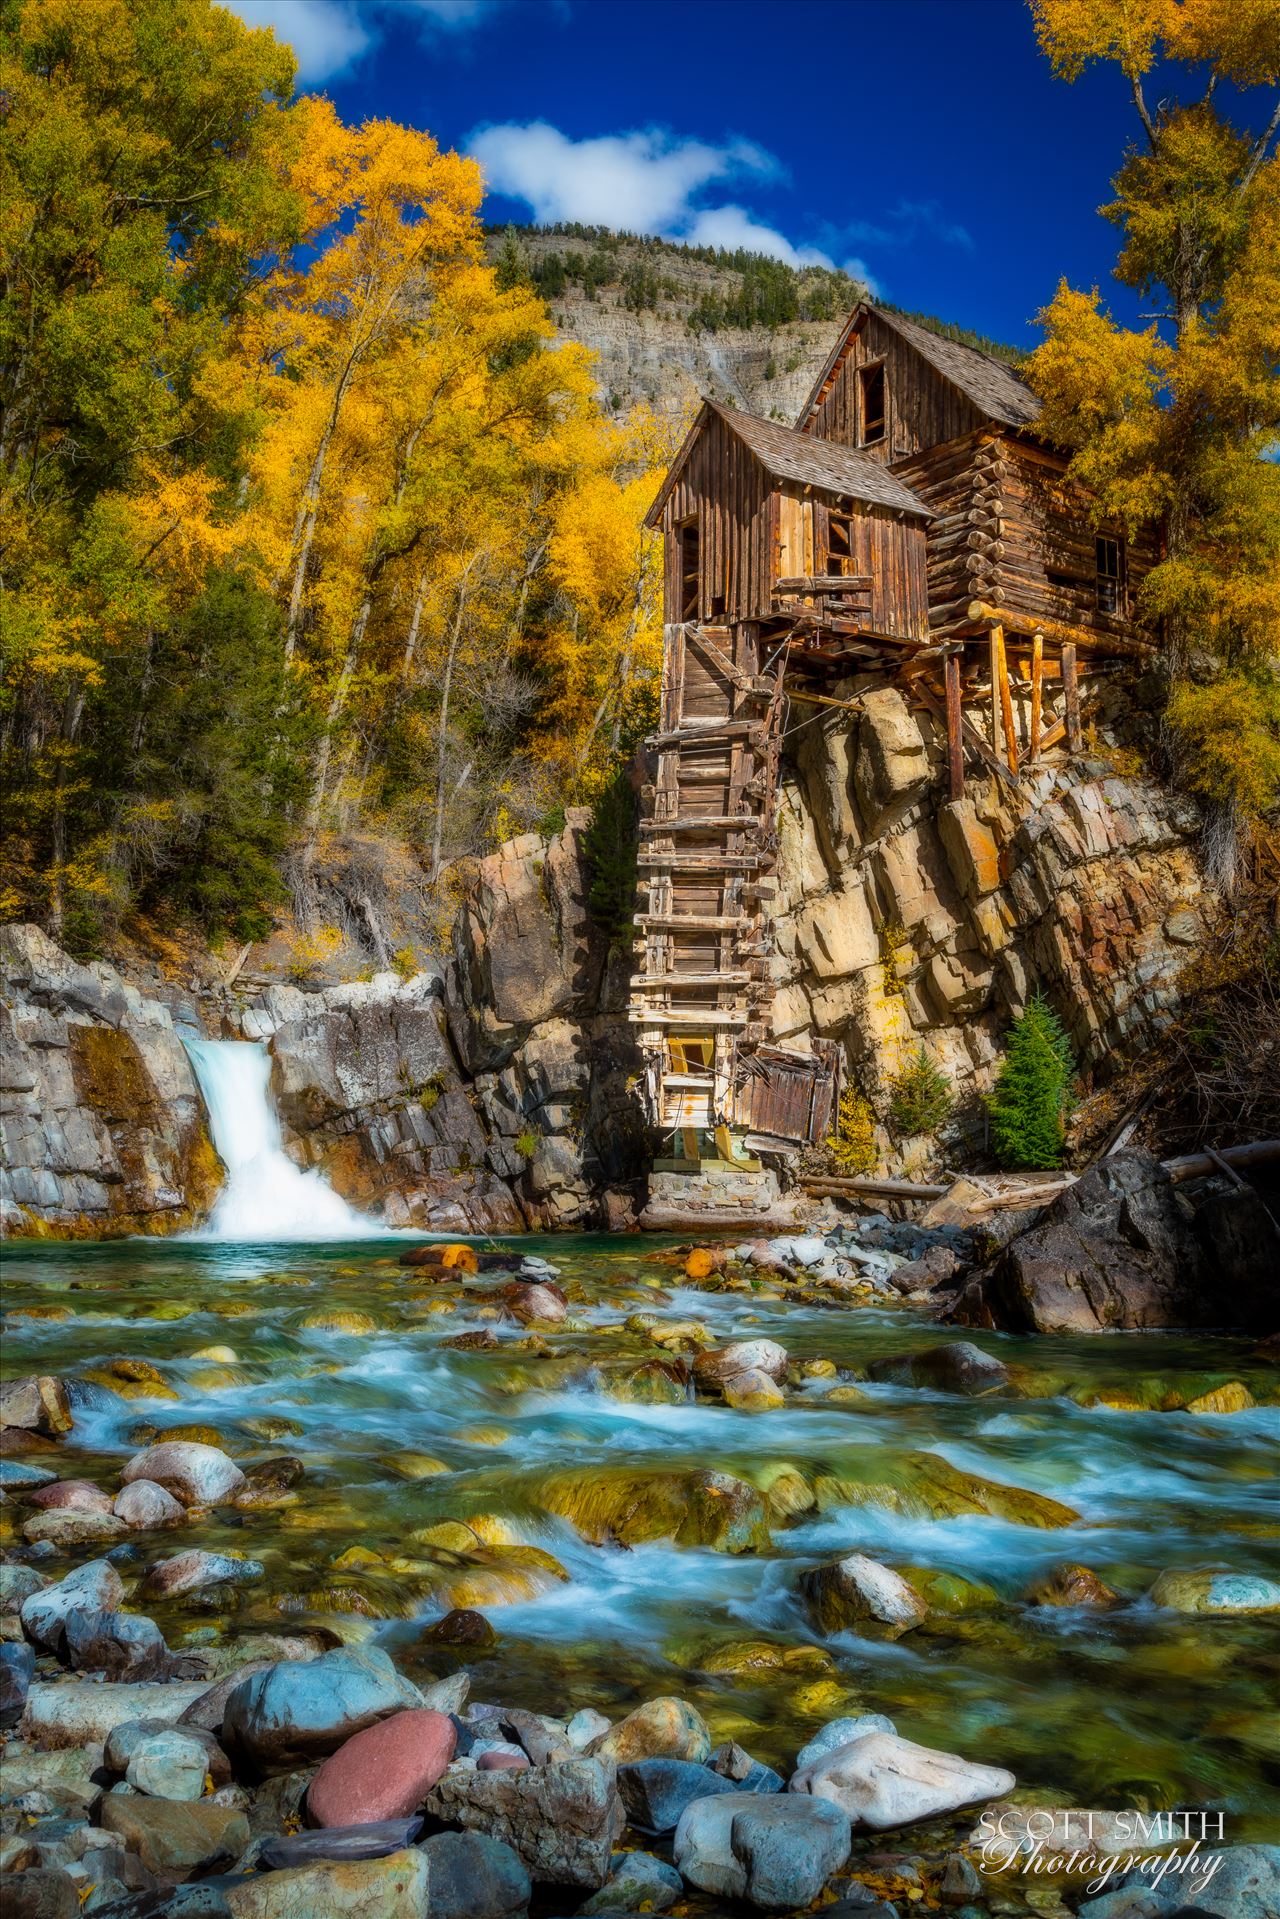 Crystal Mill, Colorado 11 The Crystal Mill, or the Old Mill is an 1892 wooden powerhouse located on an outcrop above the Crystal River in Crystal, Colorado by Scott Smith Photos